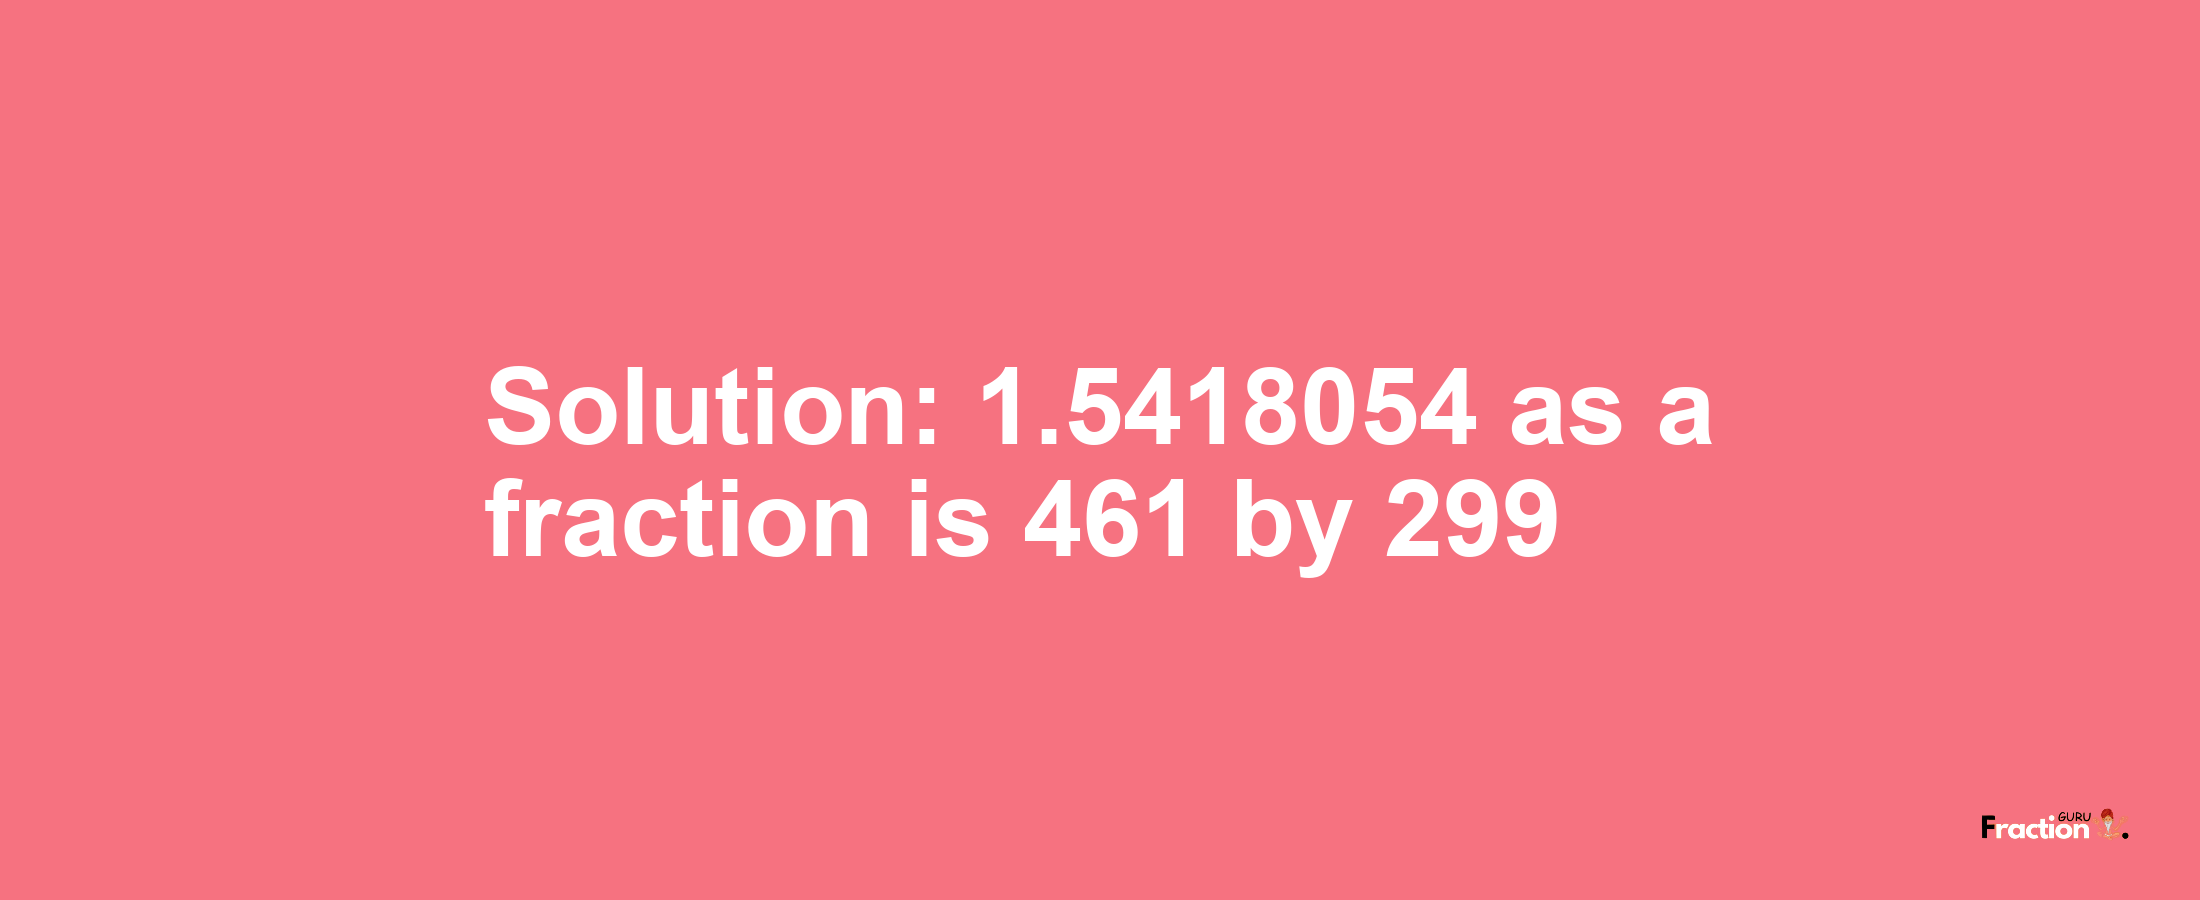 Solution:1.5418054 as a fraction is 461/299